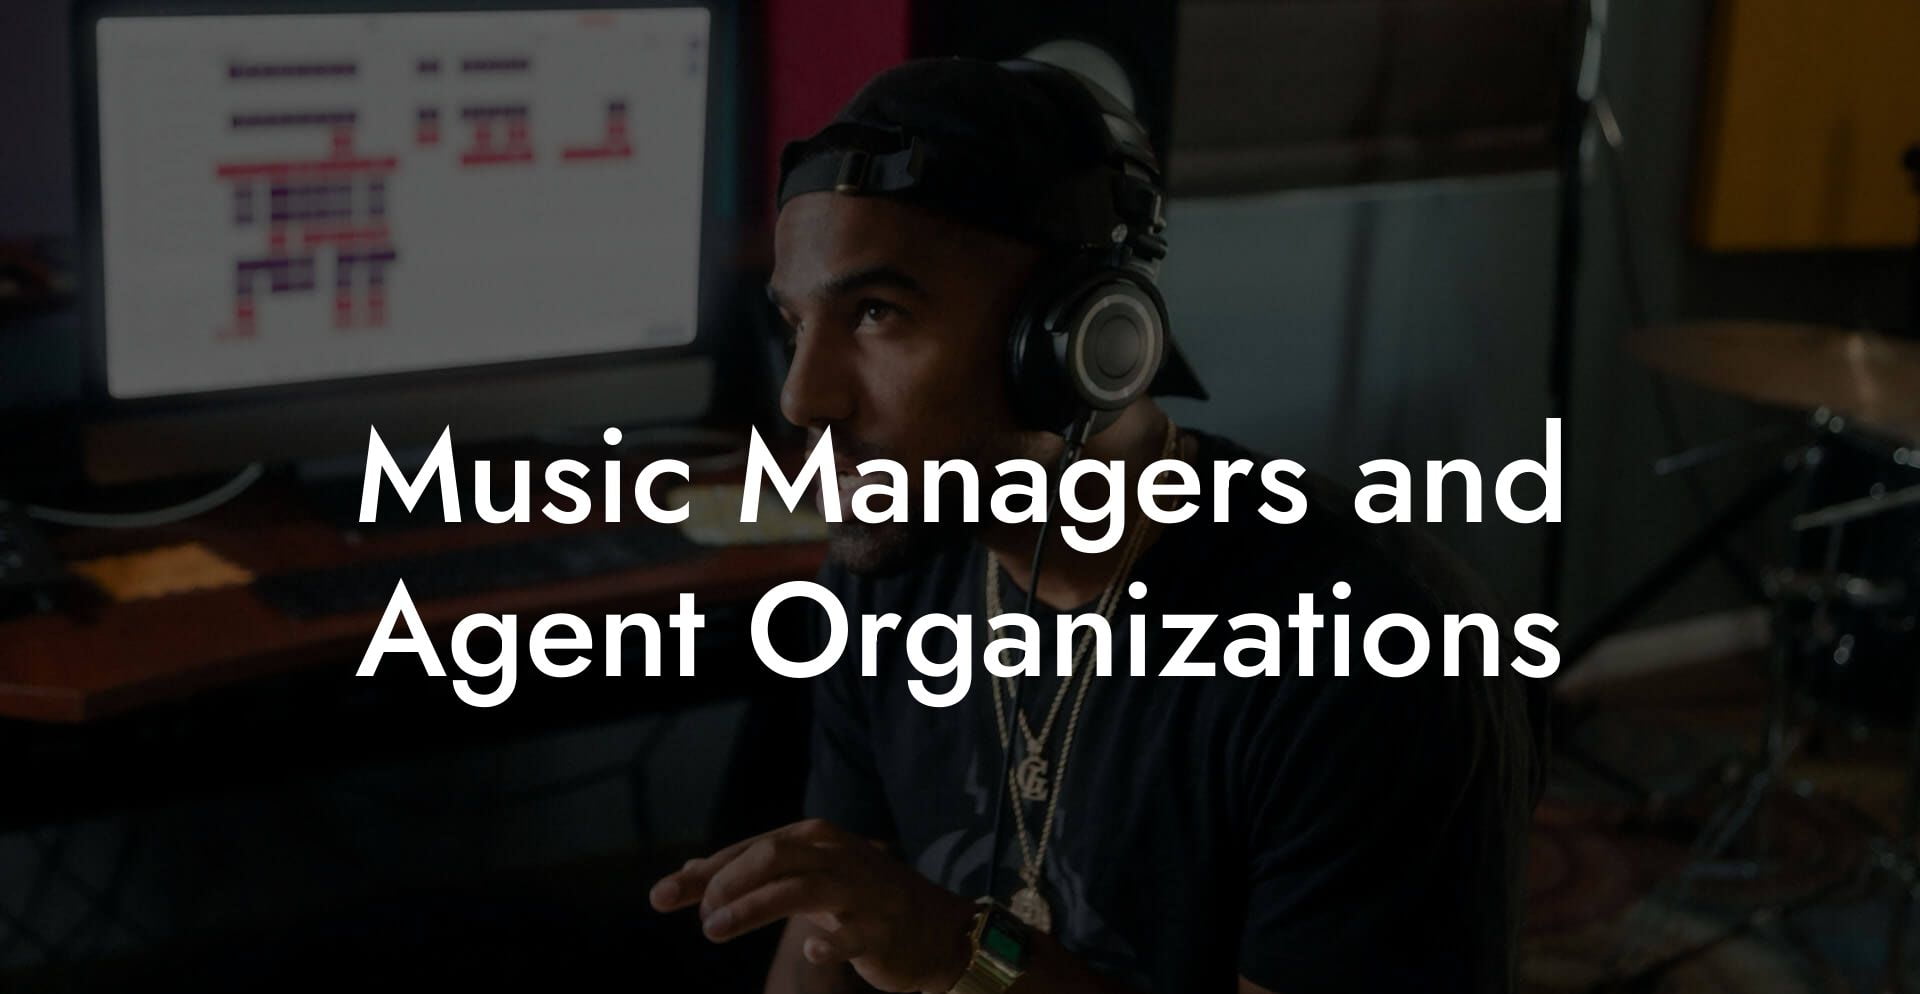 Music Managers and Agent Organizations